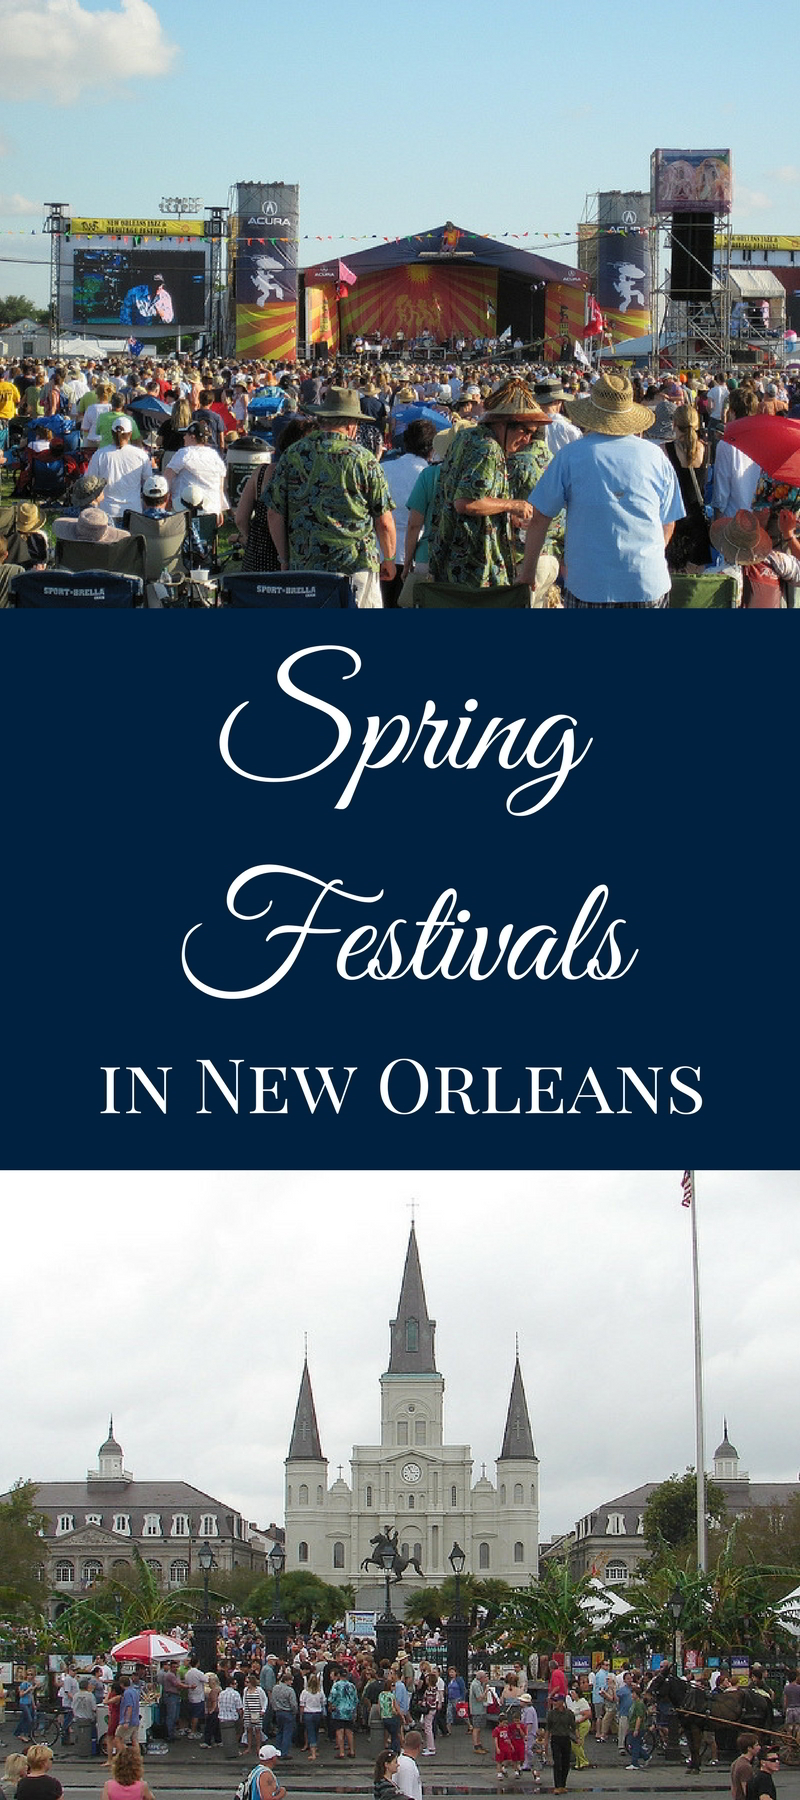 Spring is in the air and we’re ready to celebrate. From St. Patrick's Day to French Quarter Festival to Jazz Fest, enjoy these New Orleans spring festivals!